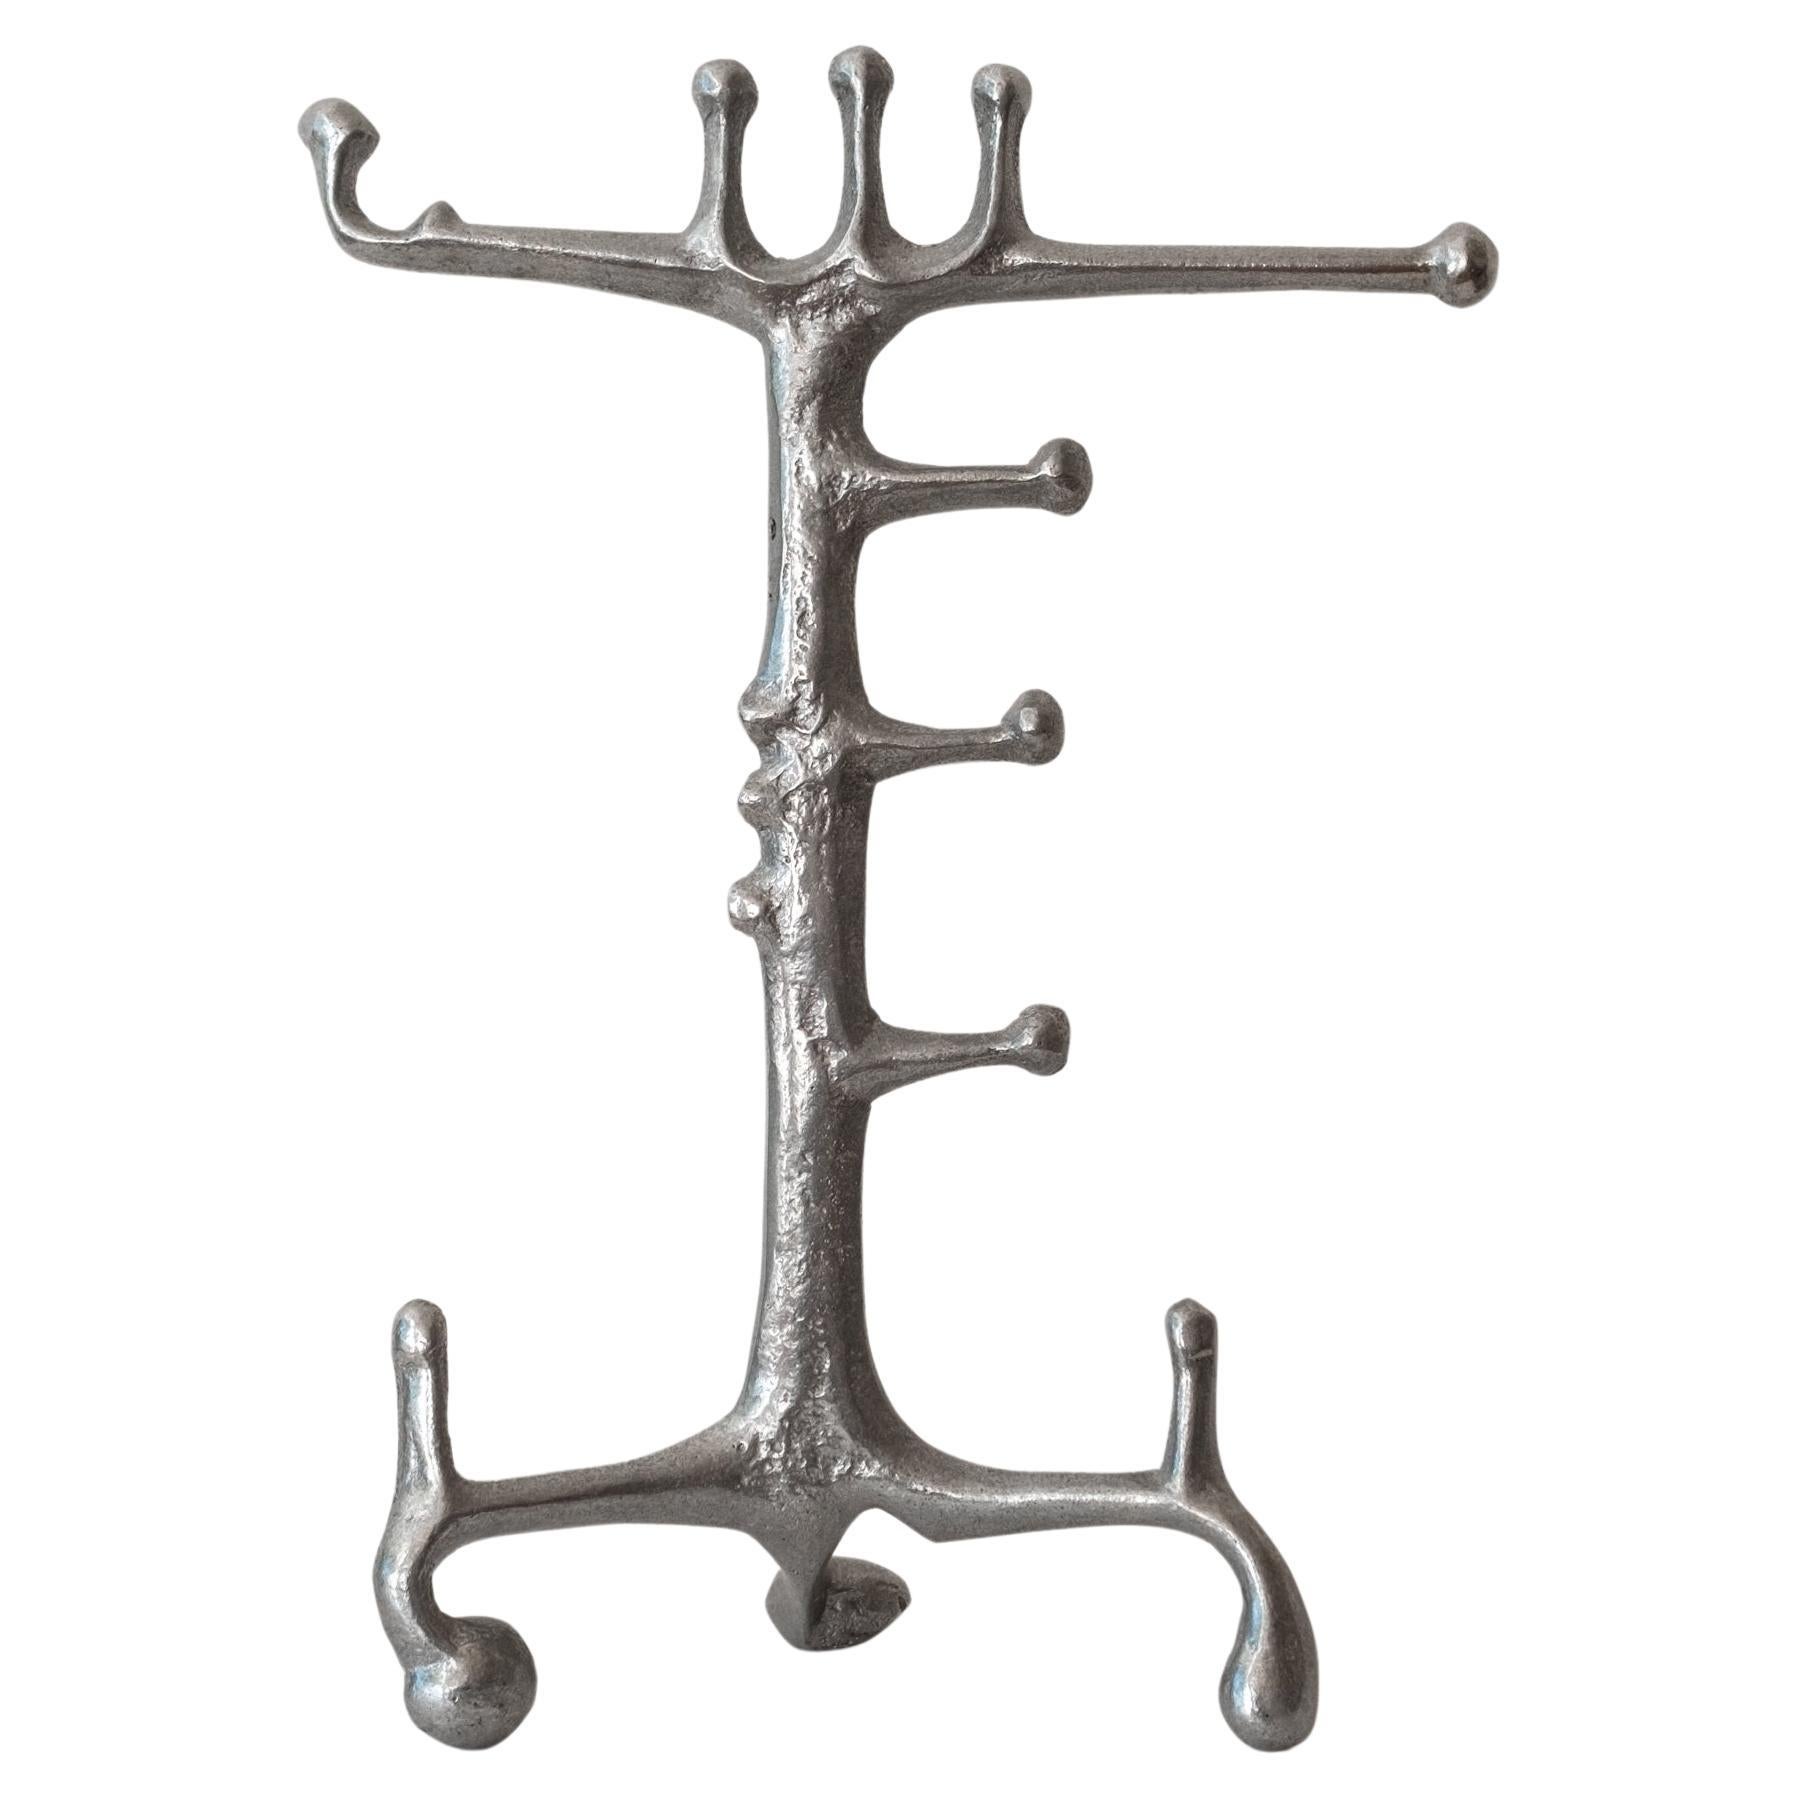 Donald Drumm Aluminum Sculpture Jewelry Stand For Sale